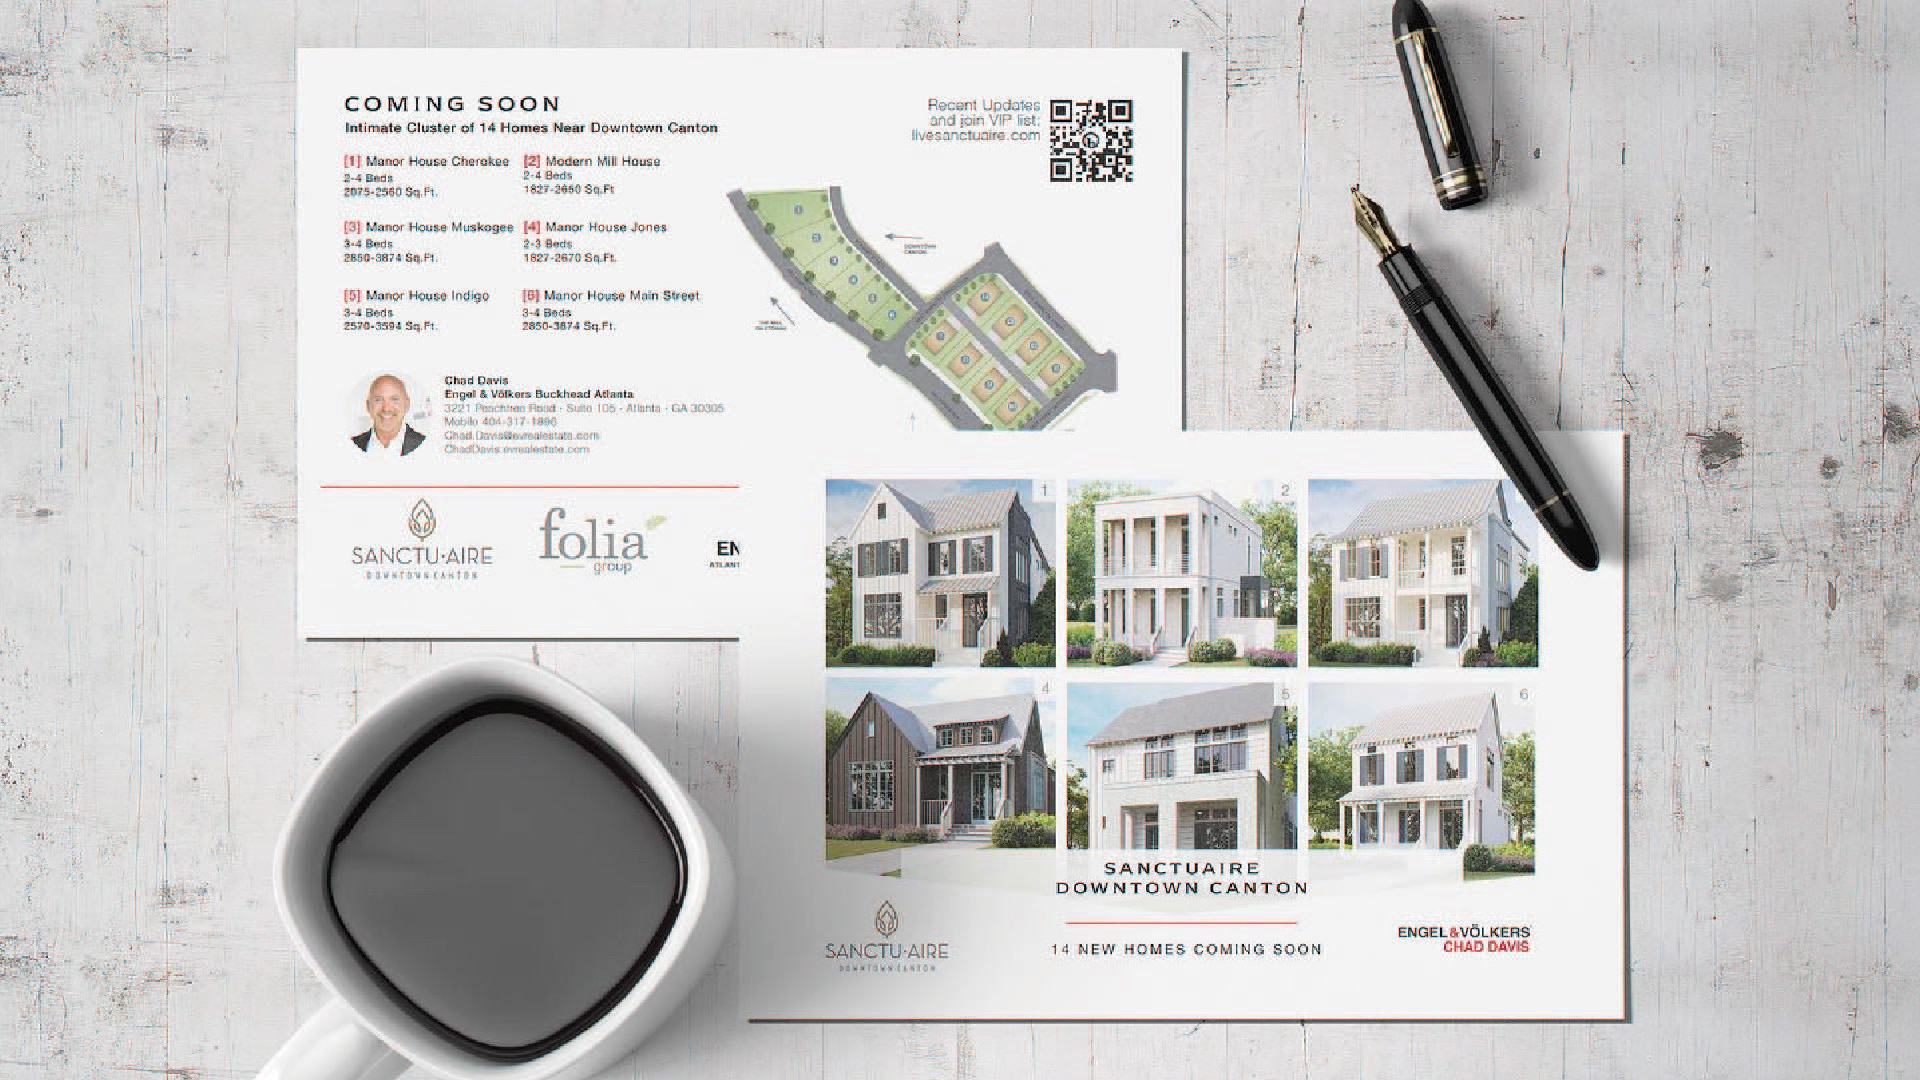 E&V Real Estate Postcard / "E&V  Real Estate Postcard" Internship, 2022. This postcard is advertising a new commercial build for Engel&Volkers. I had to keep the company's look and feel while including all the important information.